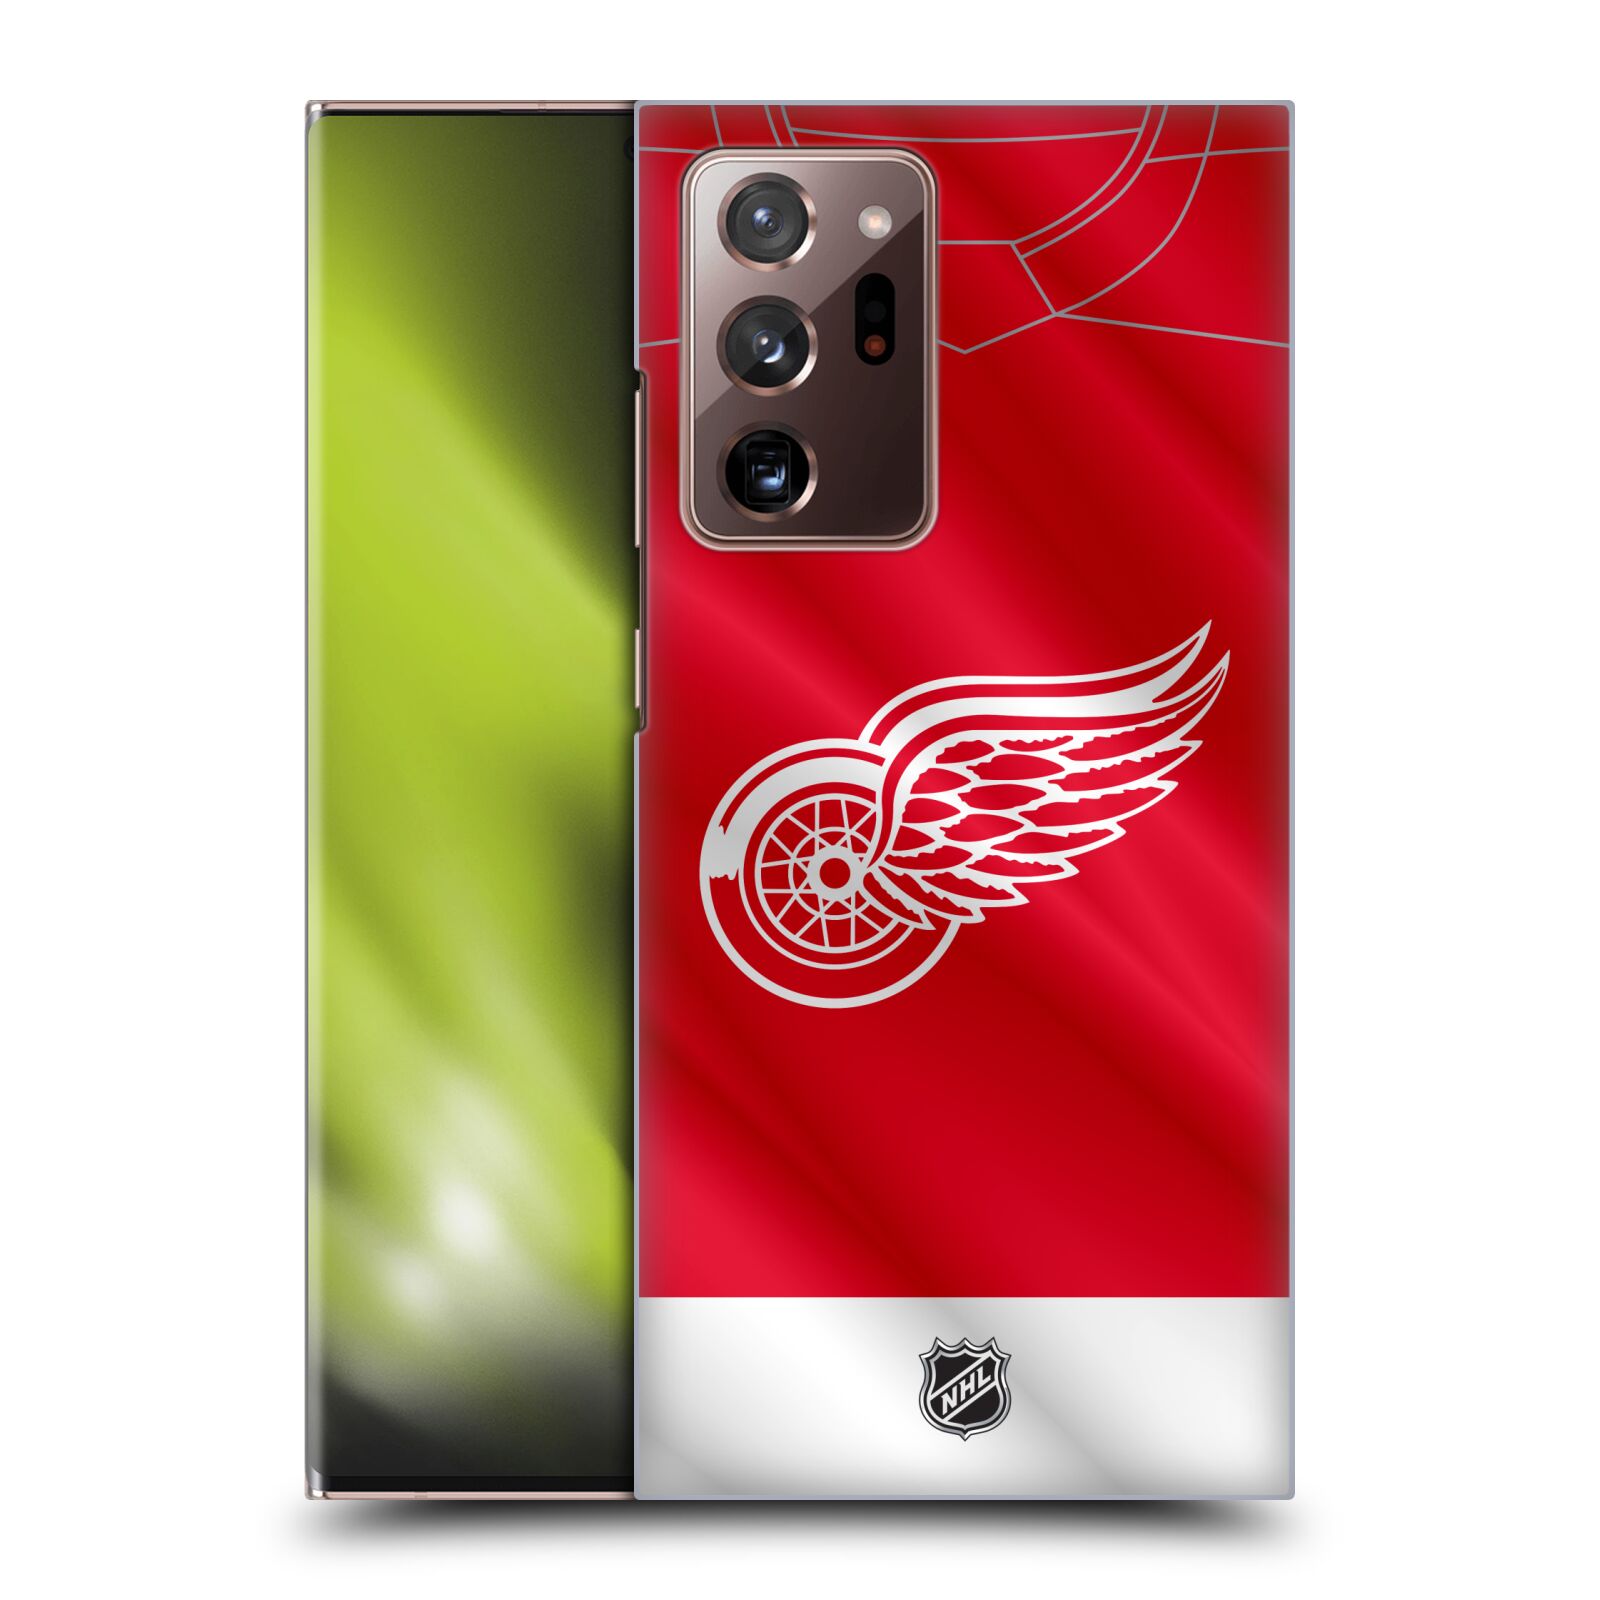 Pouzdro na mobil Samsung Galaxy Note 20 ULTRA - HEAD CASE - Hokej NHL - Detroit Red Wings - Dres